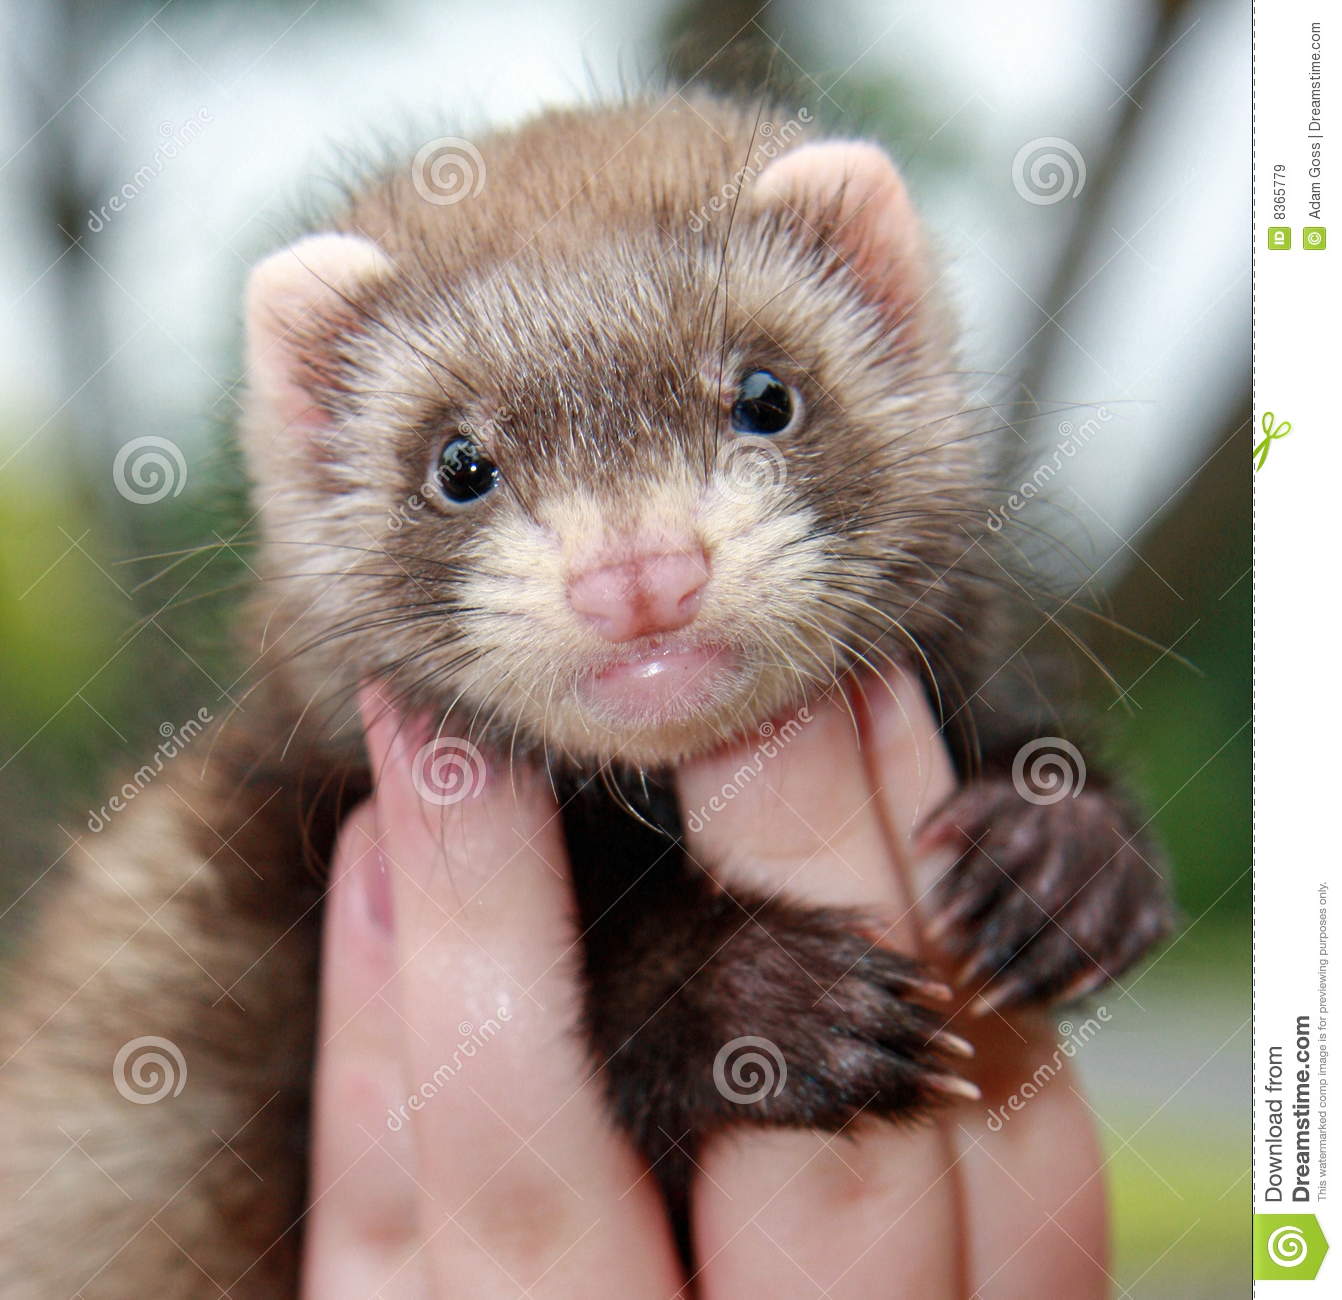 Person Holding Ferret Royalty Free Stock Images   Image  8365779